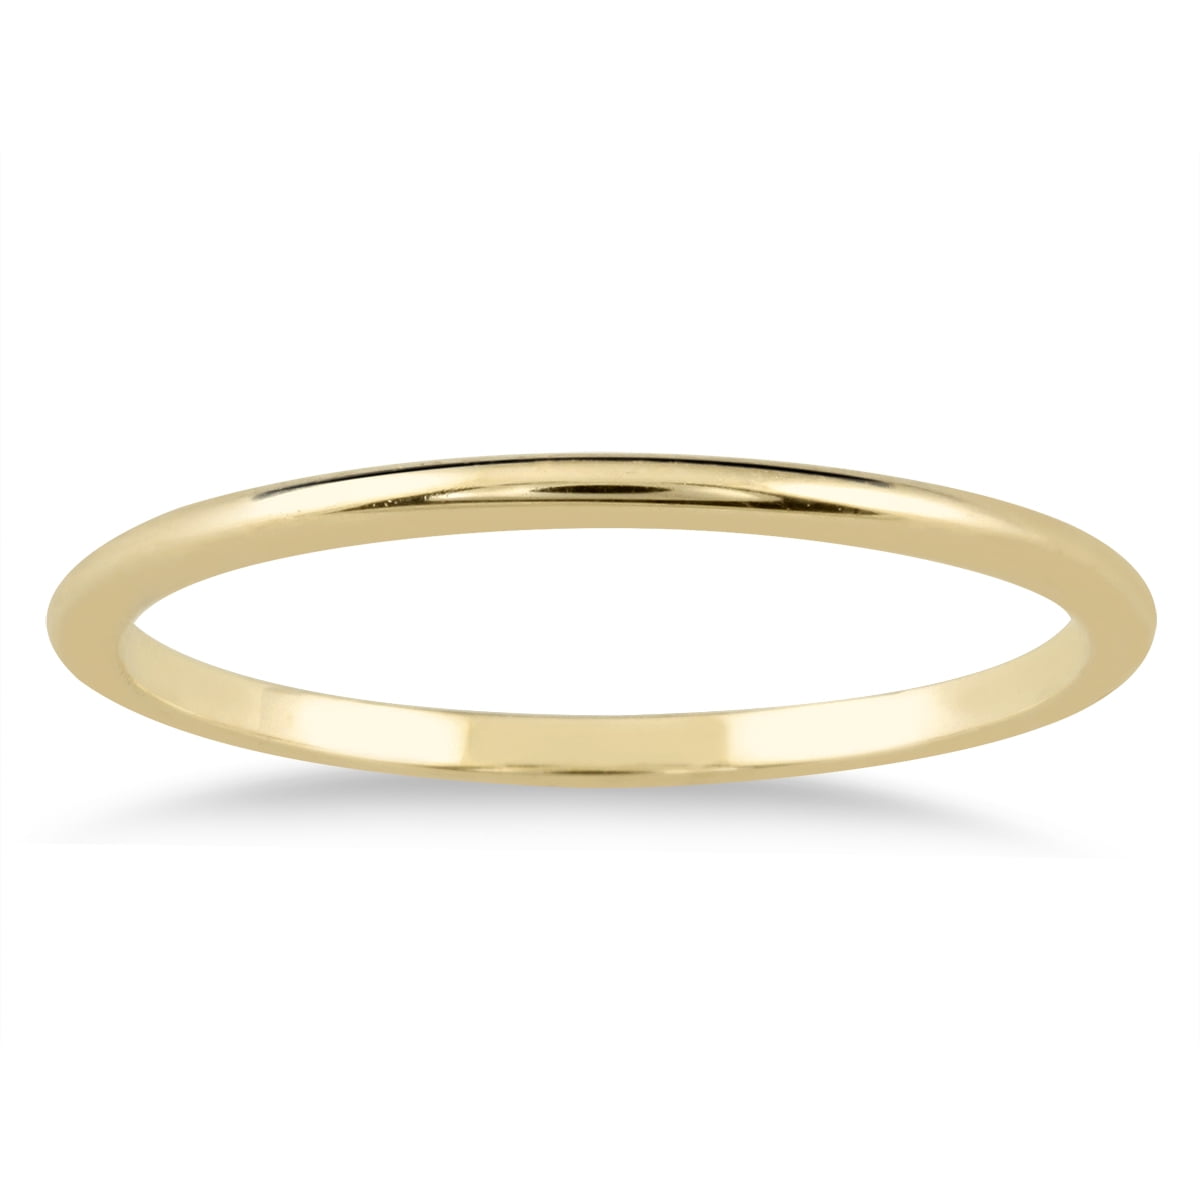 1mm Thin Domed 14k Yellow Gold Wedding Band 